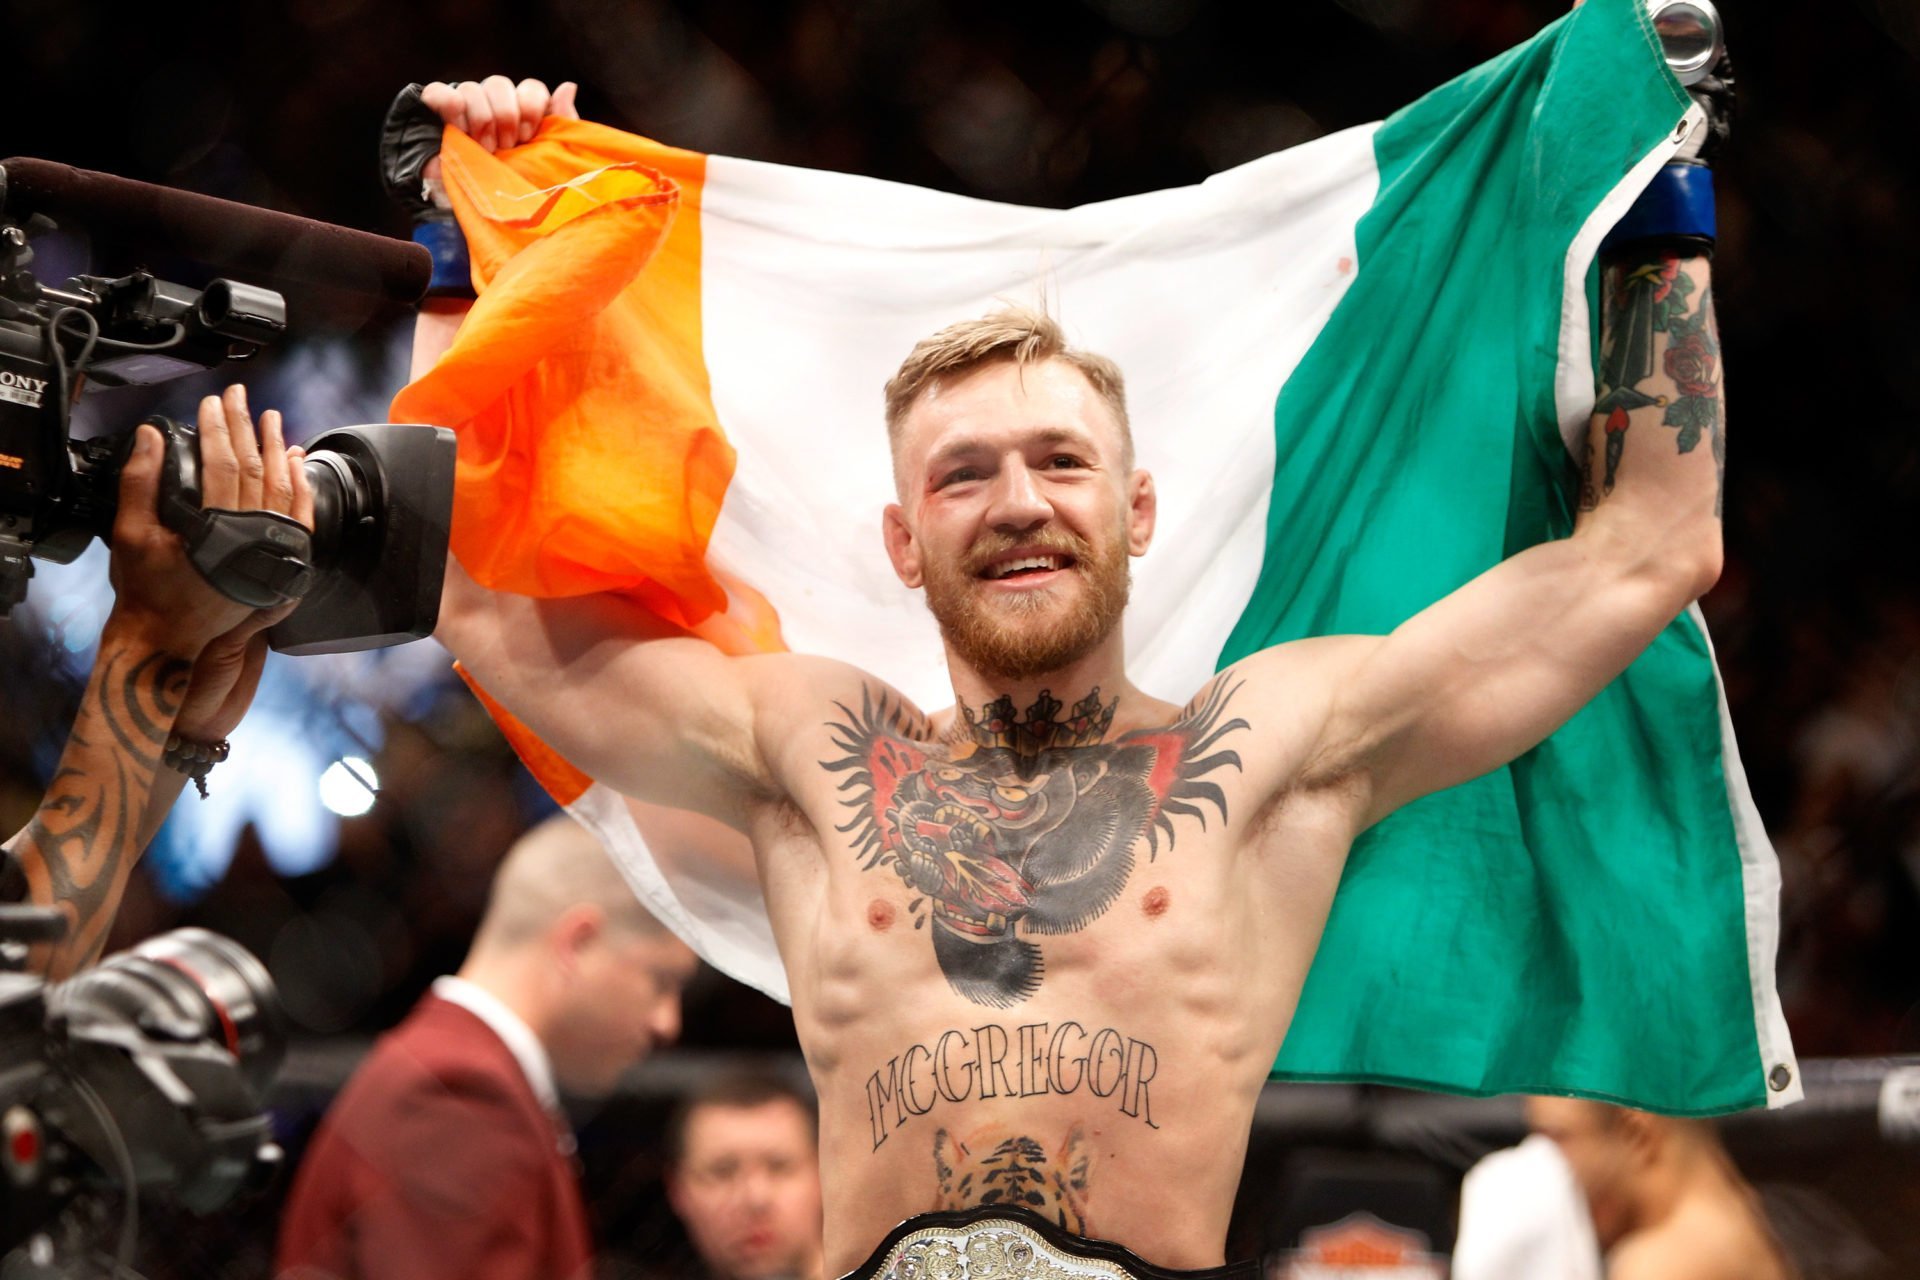 When does The Ultimate Fighter (TUF) 31 release featuring Conor McGregor?